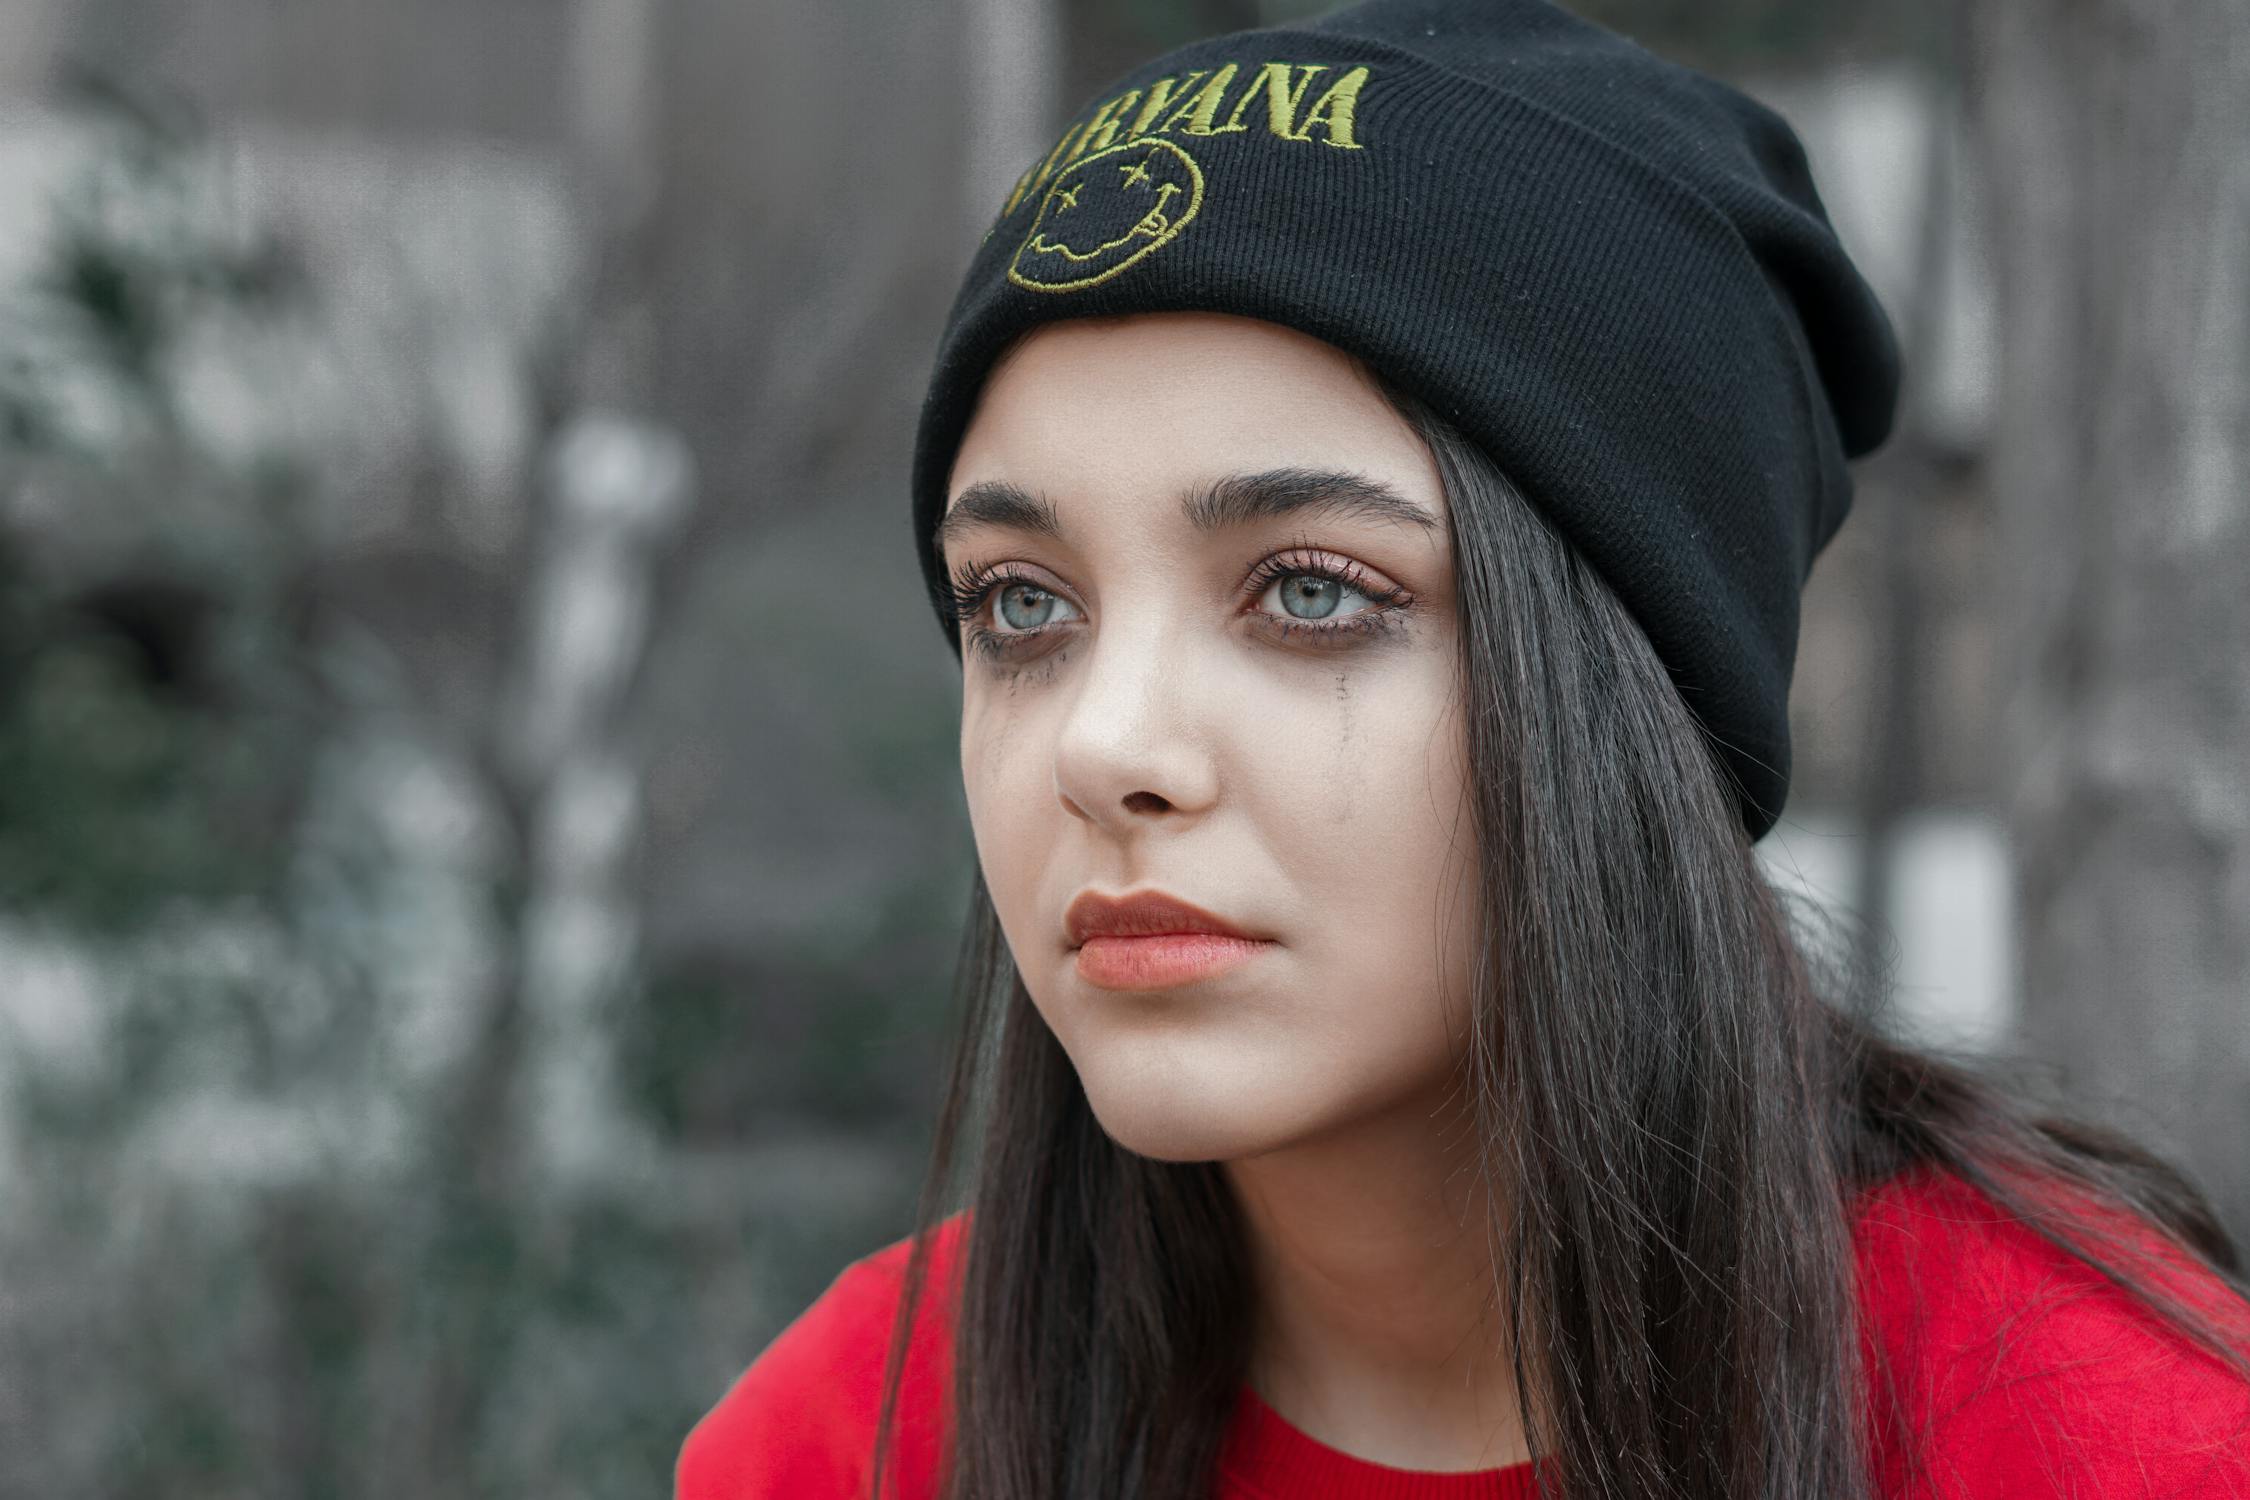 Stress Photo by emre keshavarz from Pexels: https://www.pexels.com/photo/woman-in-black-knit-cap-and-red-shirt-3788039/